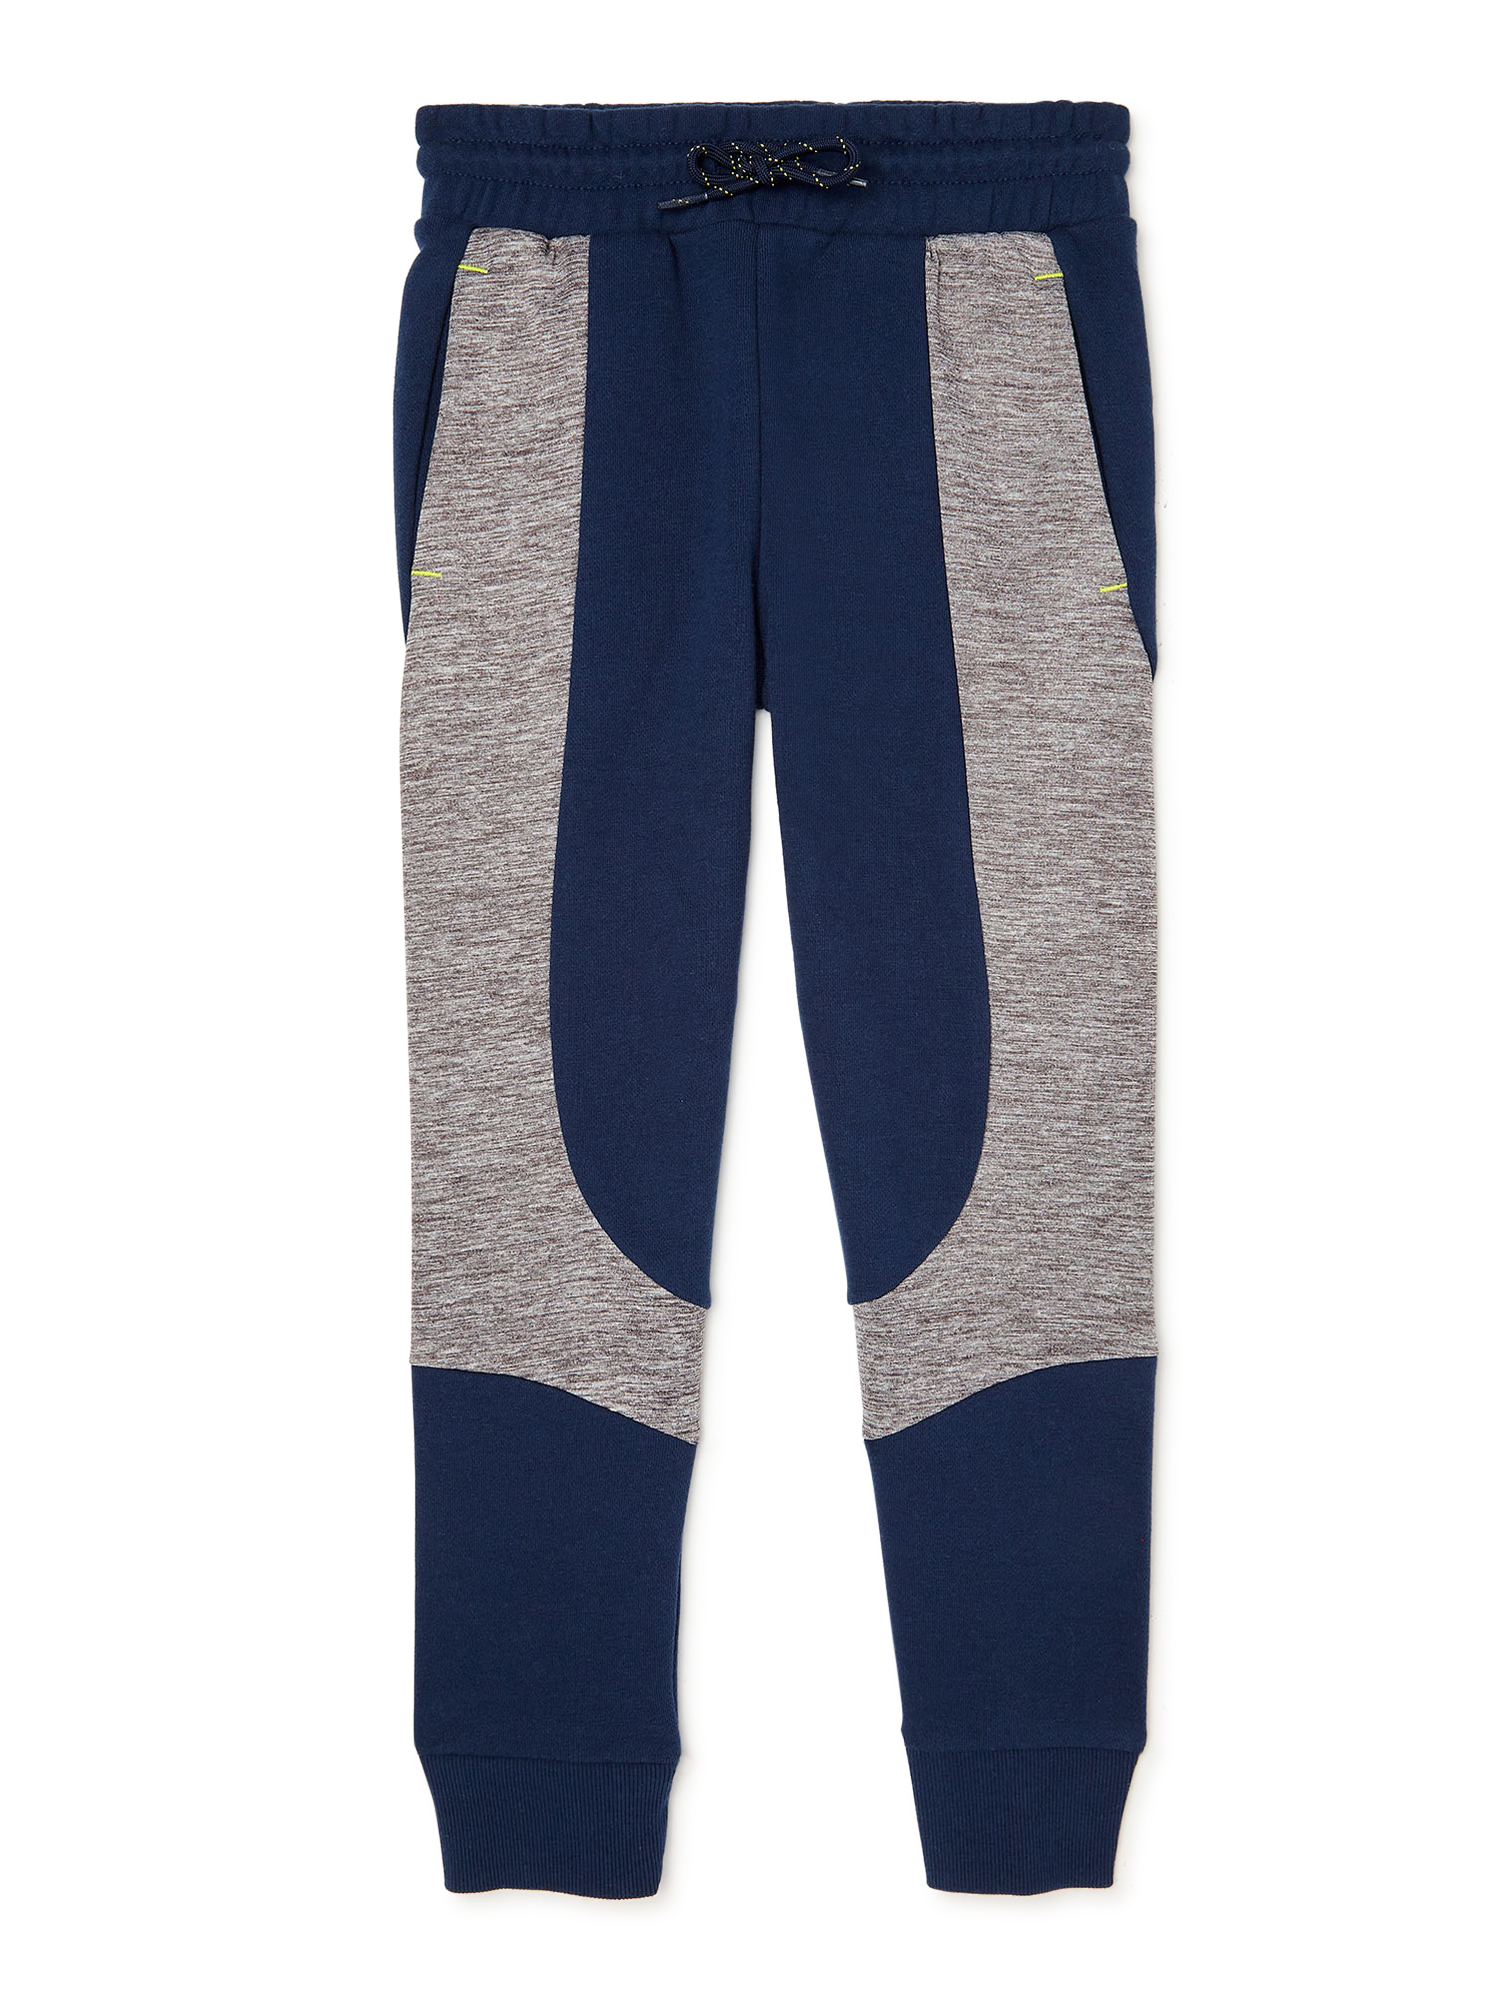 Athletic Works Boys’ French Terry Colorblock Jogger Pants, Sizes 4-18 & Husky - image 1 of 3